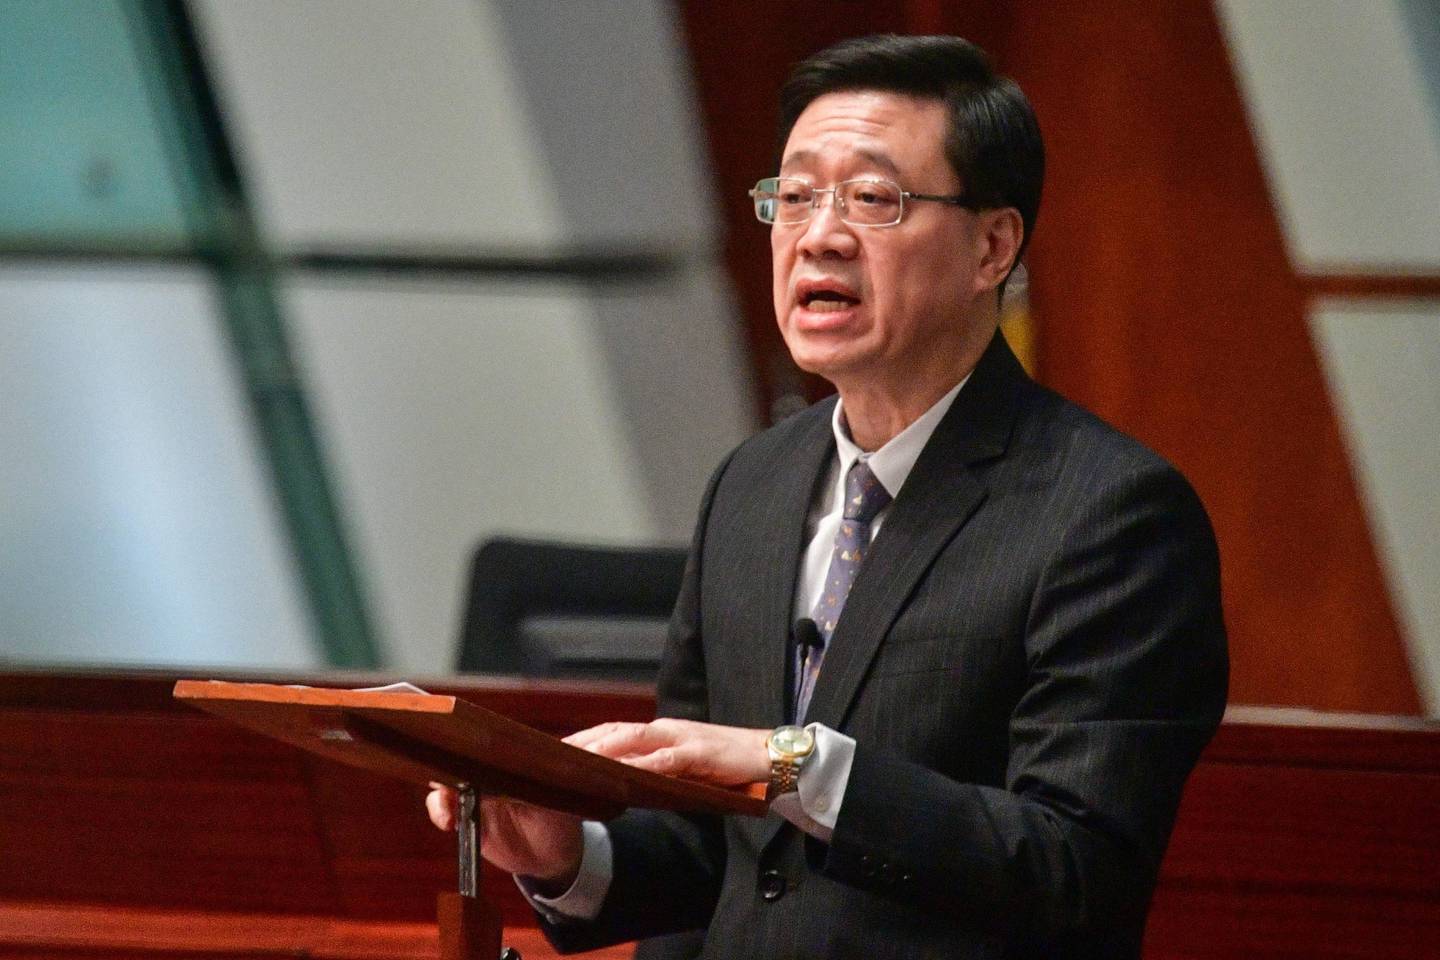 Hong Kong Secretary for Security John Lee officially withdraws the extradition bill at the Legislative Council complex in Hong Kong on October 23, 2019. - Months of increasingly violent pro-democracy demonstrations in the financial hub were sparked by protests against a now-cancelled extradition law -- which would have allowed suspects to be extradited to the authoritarian mainland China. (Photo by Anthony WALLACE / AFP)